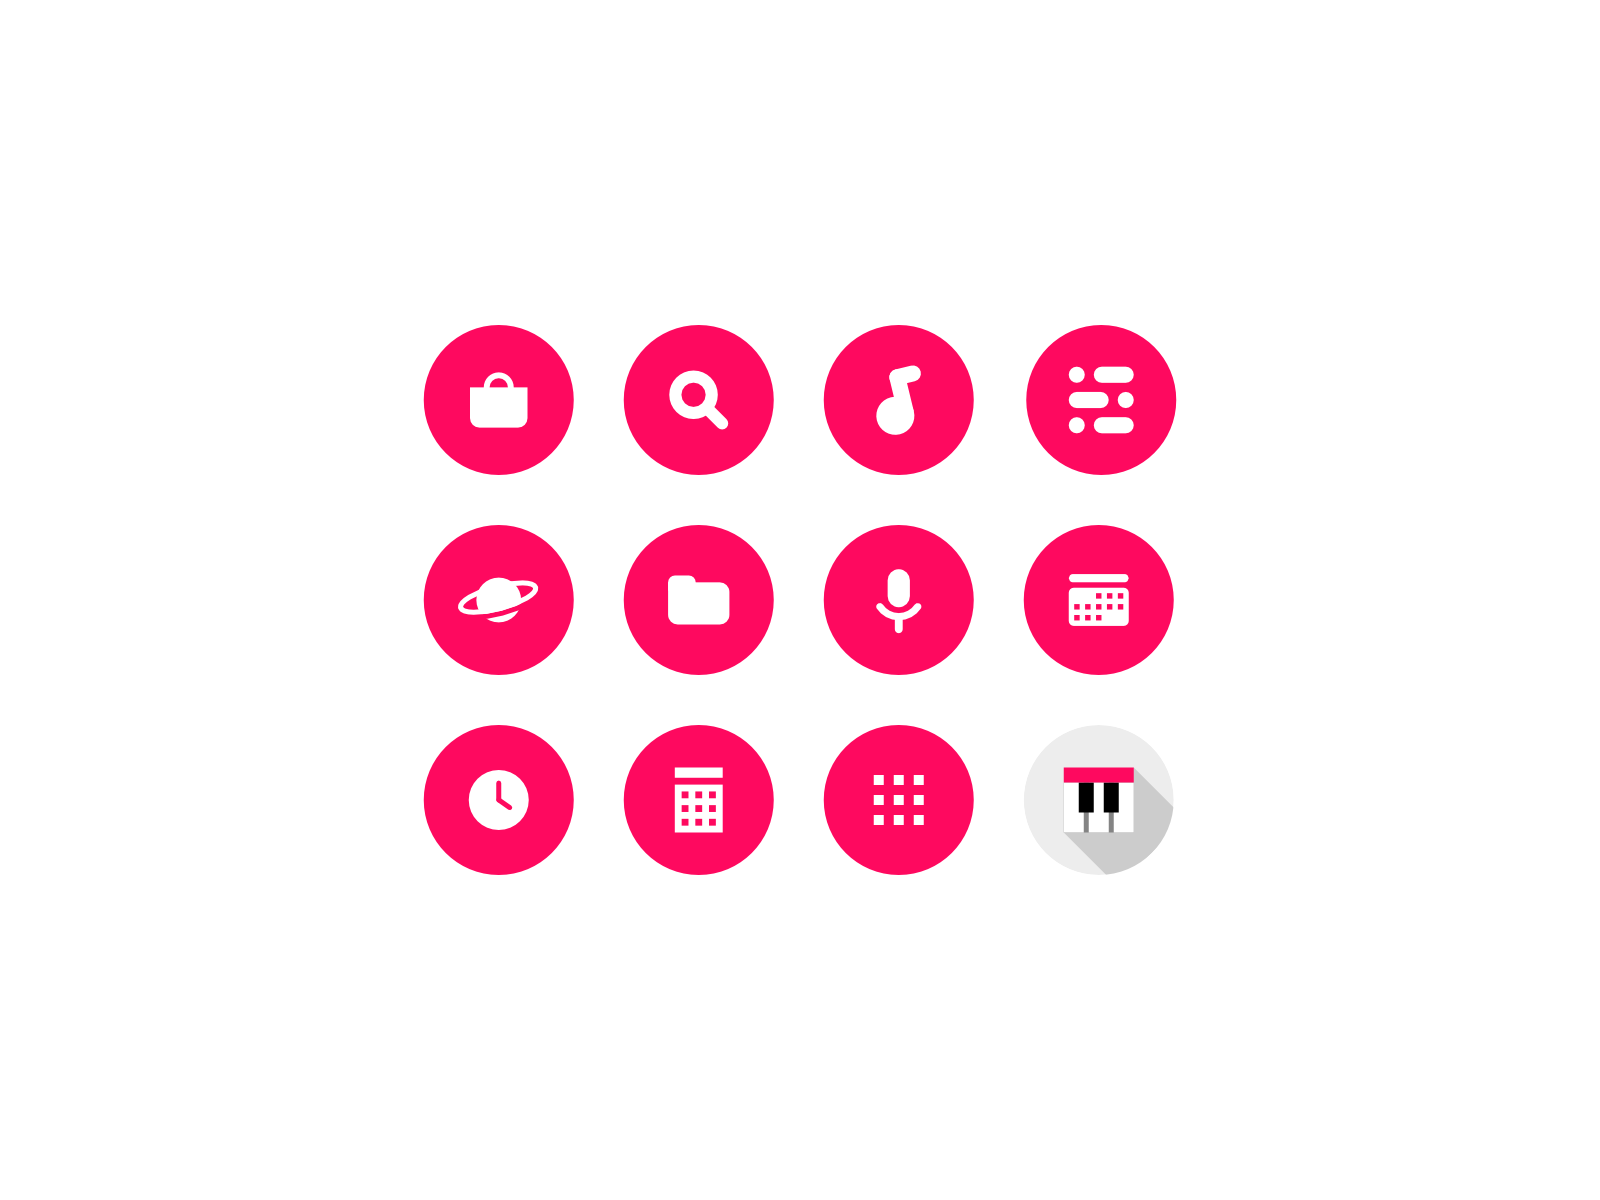 RedOS - Icons: Set #1 by Cyanistic Designs on Dribbble